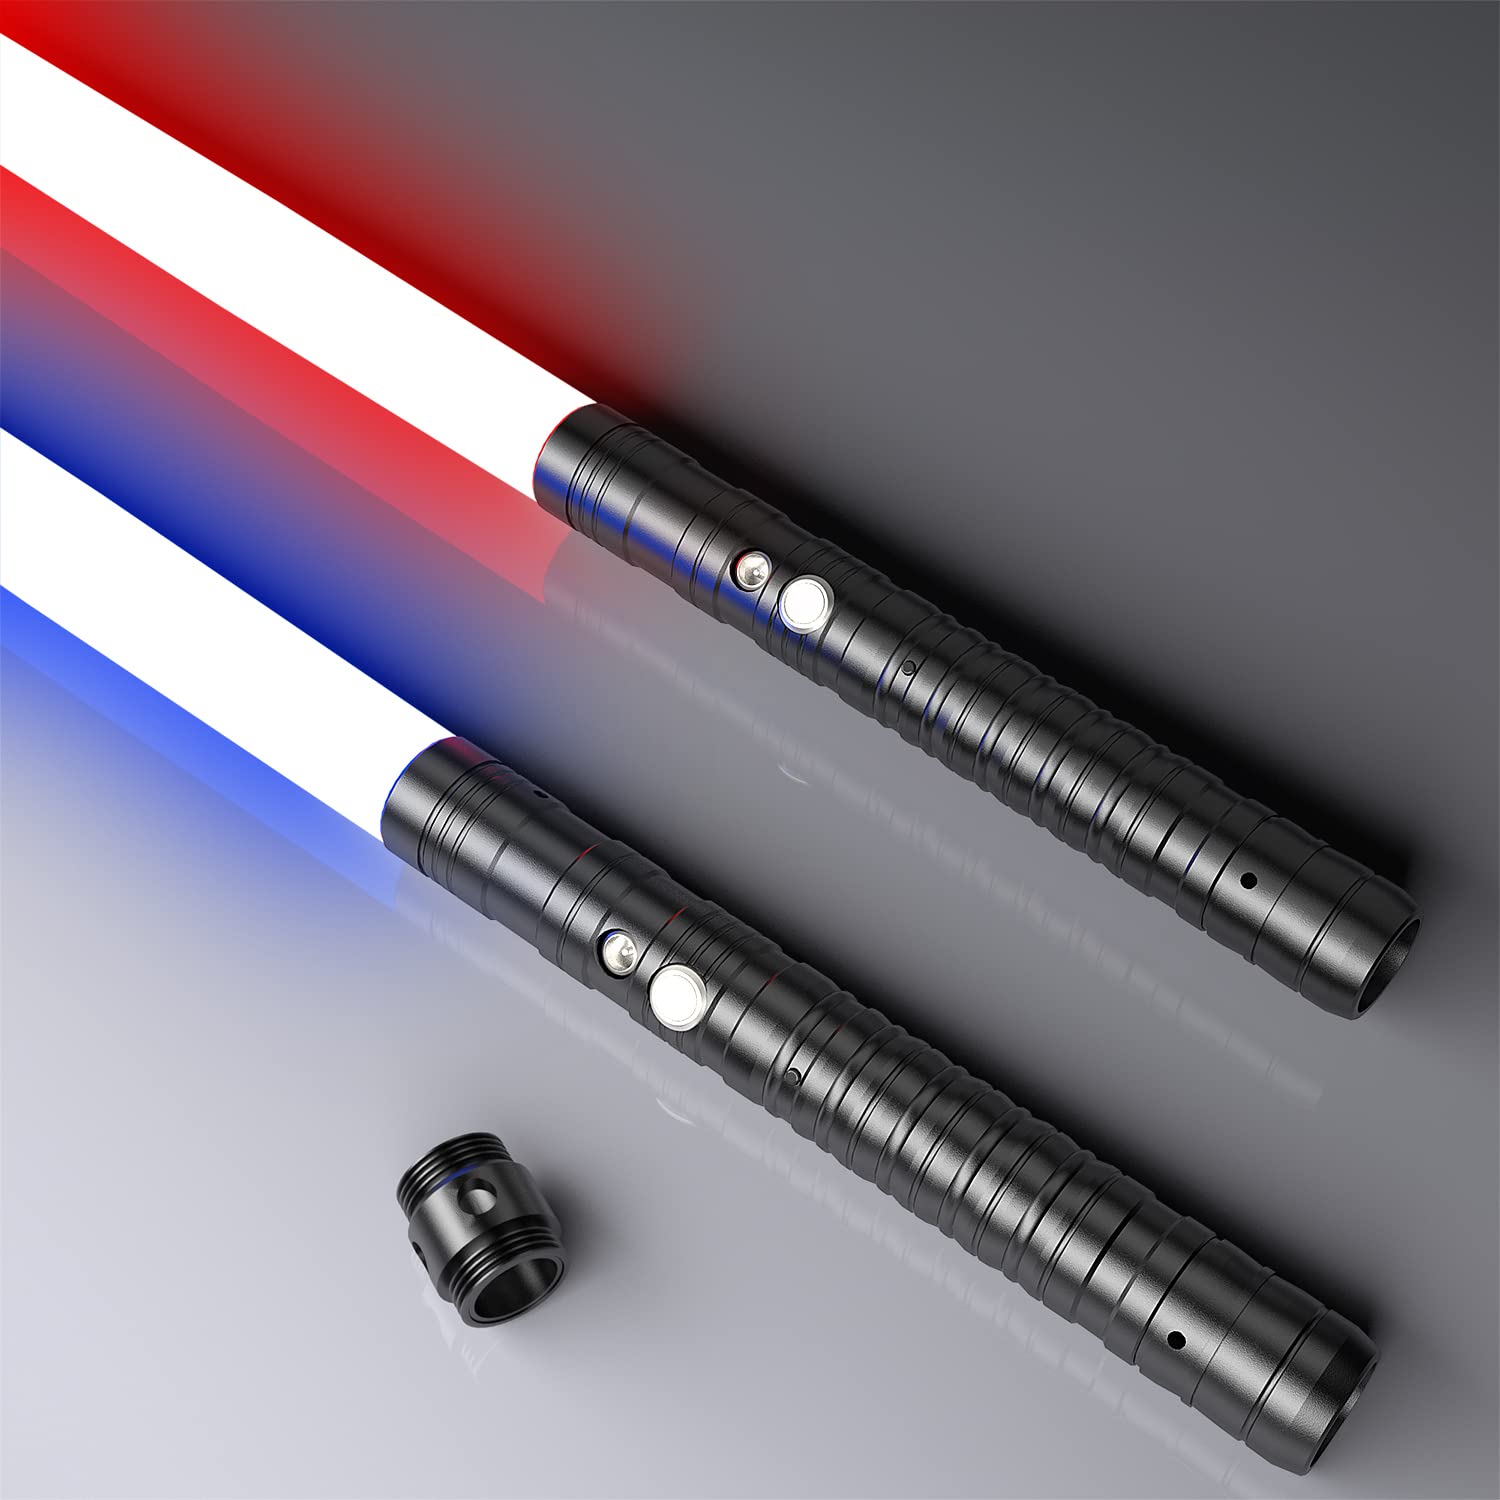 Beyondtrade Upgraded Lightsabers Metal Hilt 2 Pack 7 colors Double-Bladed Sword with FX Sound Dueling Light Saber Toy for Adults